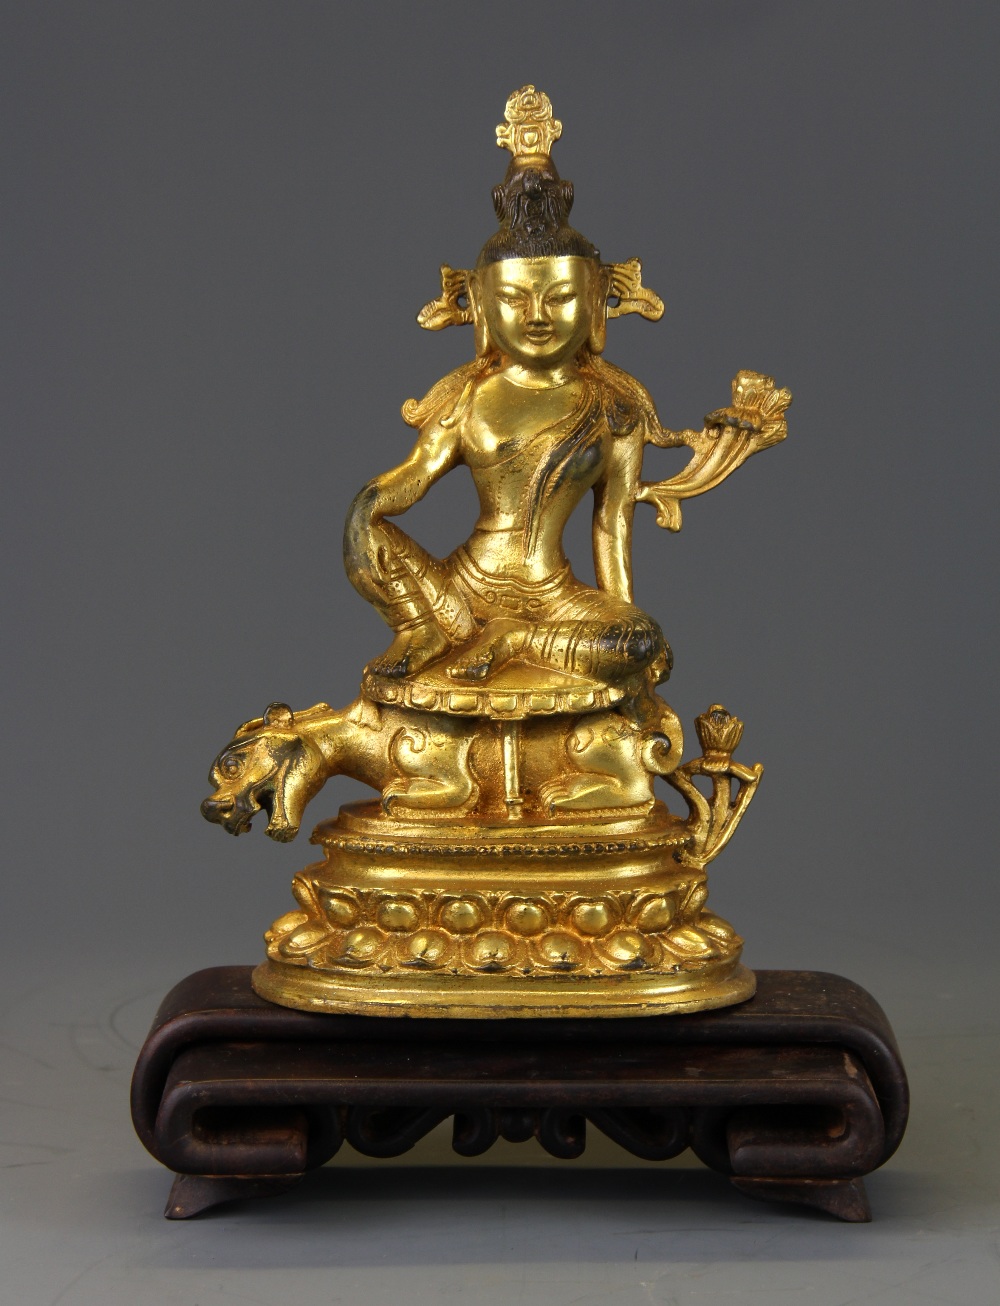 A Tibetan gilt bronze figure of a seated deity with an interlocking carved wooden stand.